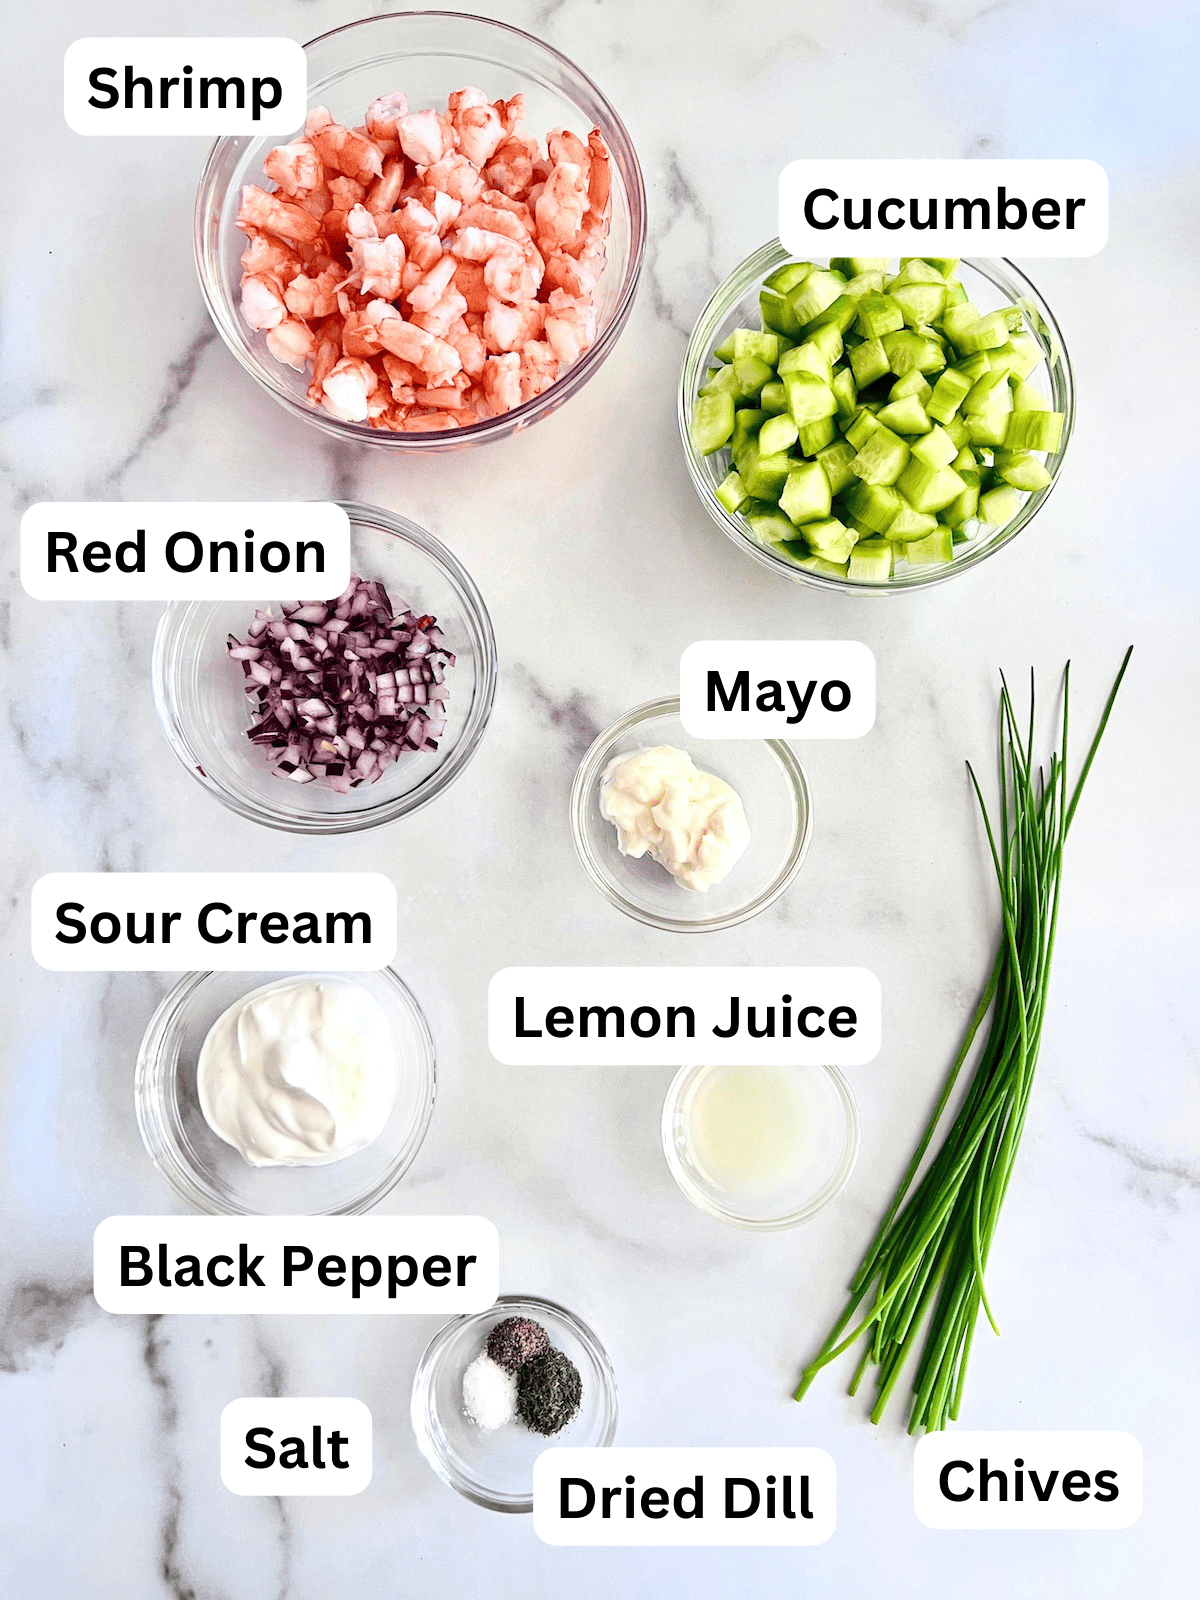 Ingredients to make the cucumber shrimp salad which is also the filling in a Poor Man's lobster roll. 